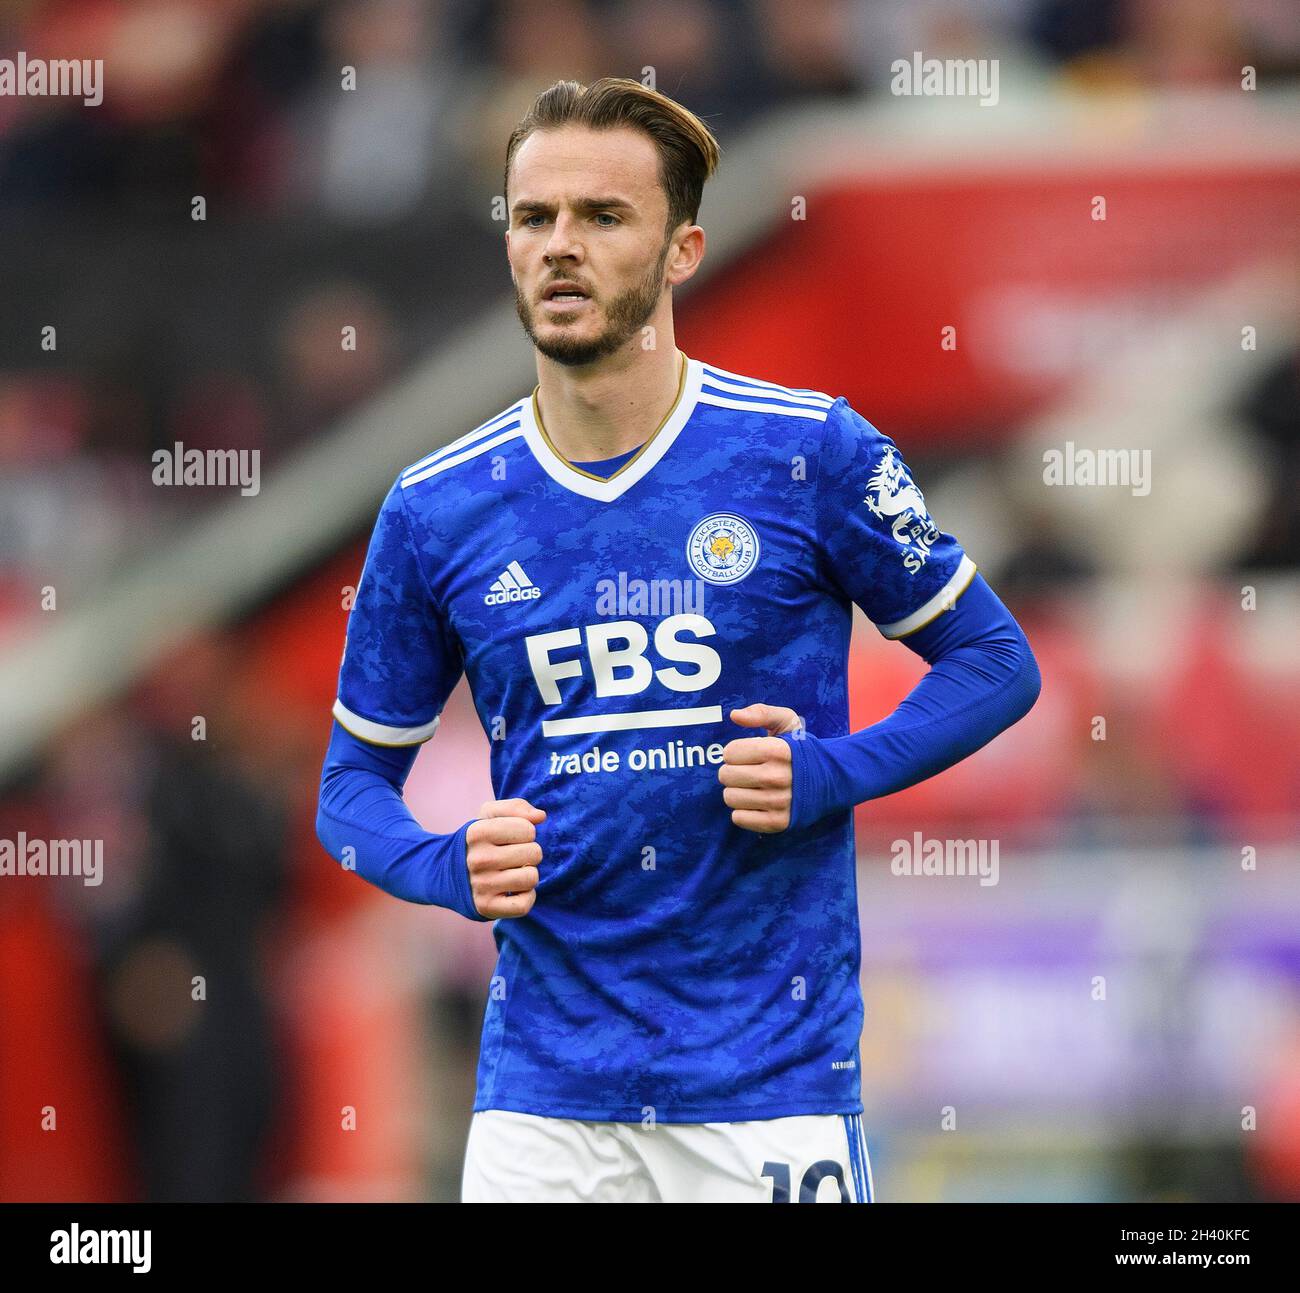 Leicester City's James Maddison during the match at the Brentford Community  Stadium. Picture Mark Pain / Alamy Stock Photo - Alamy